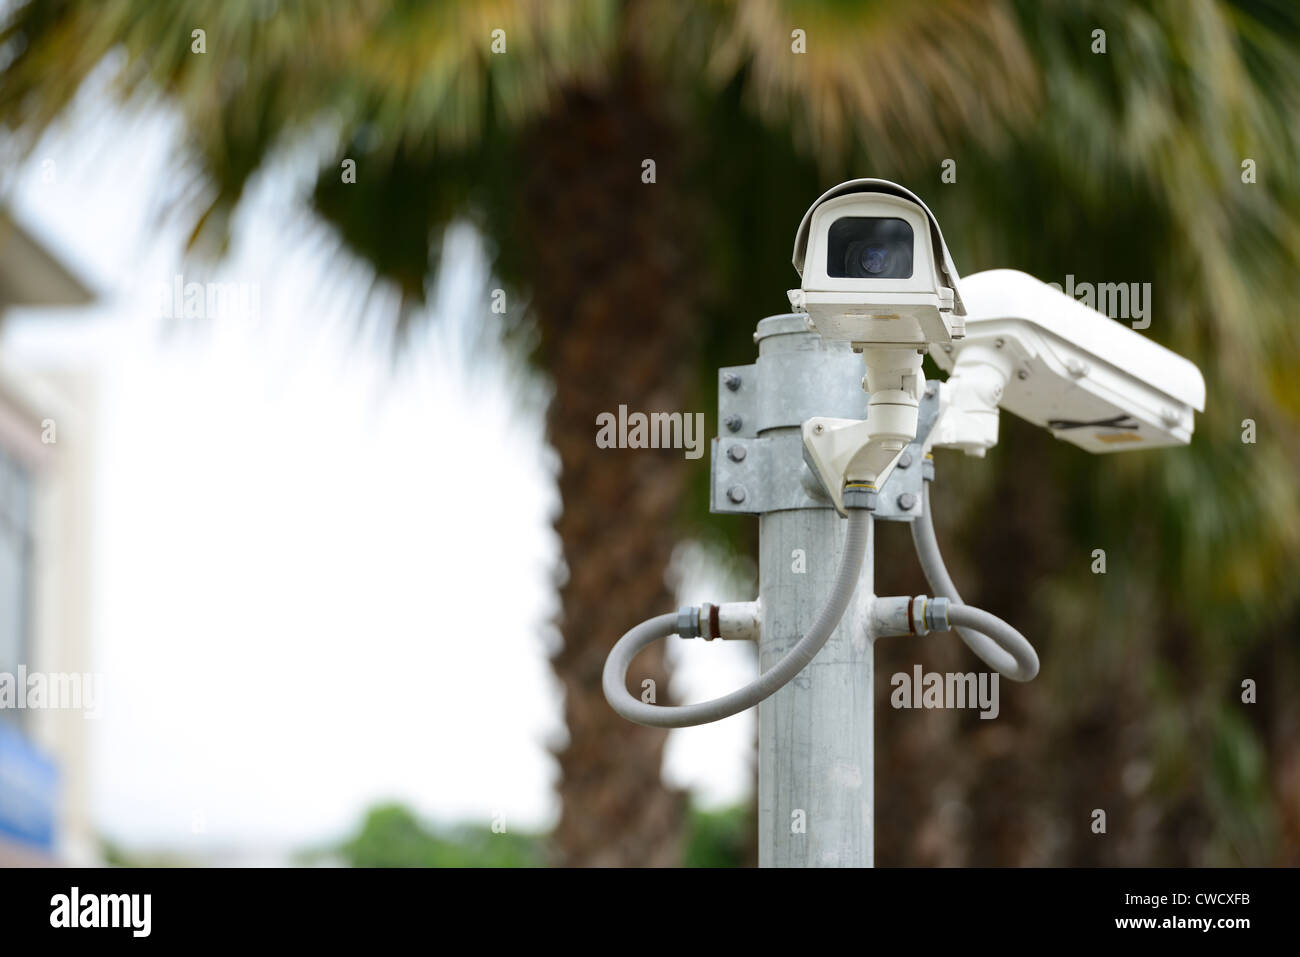 security camera on the pole next to the building Stock Photo